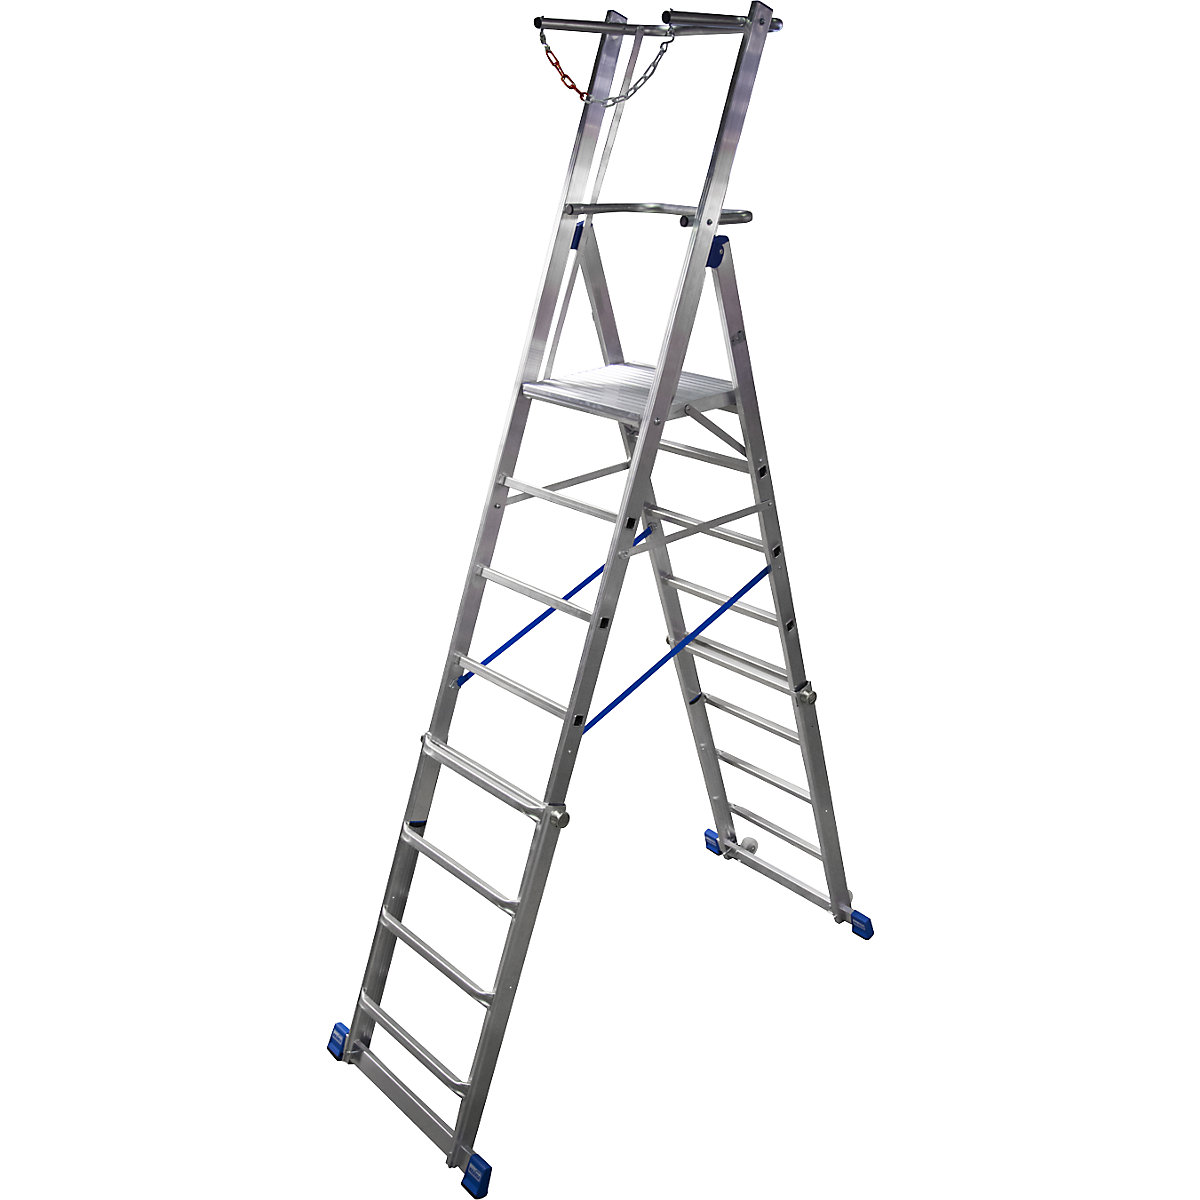 Telescopic mobile safety steps – KRAUSE